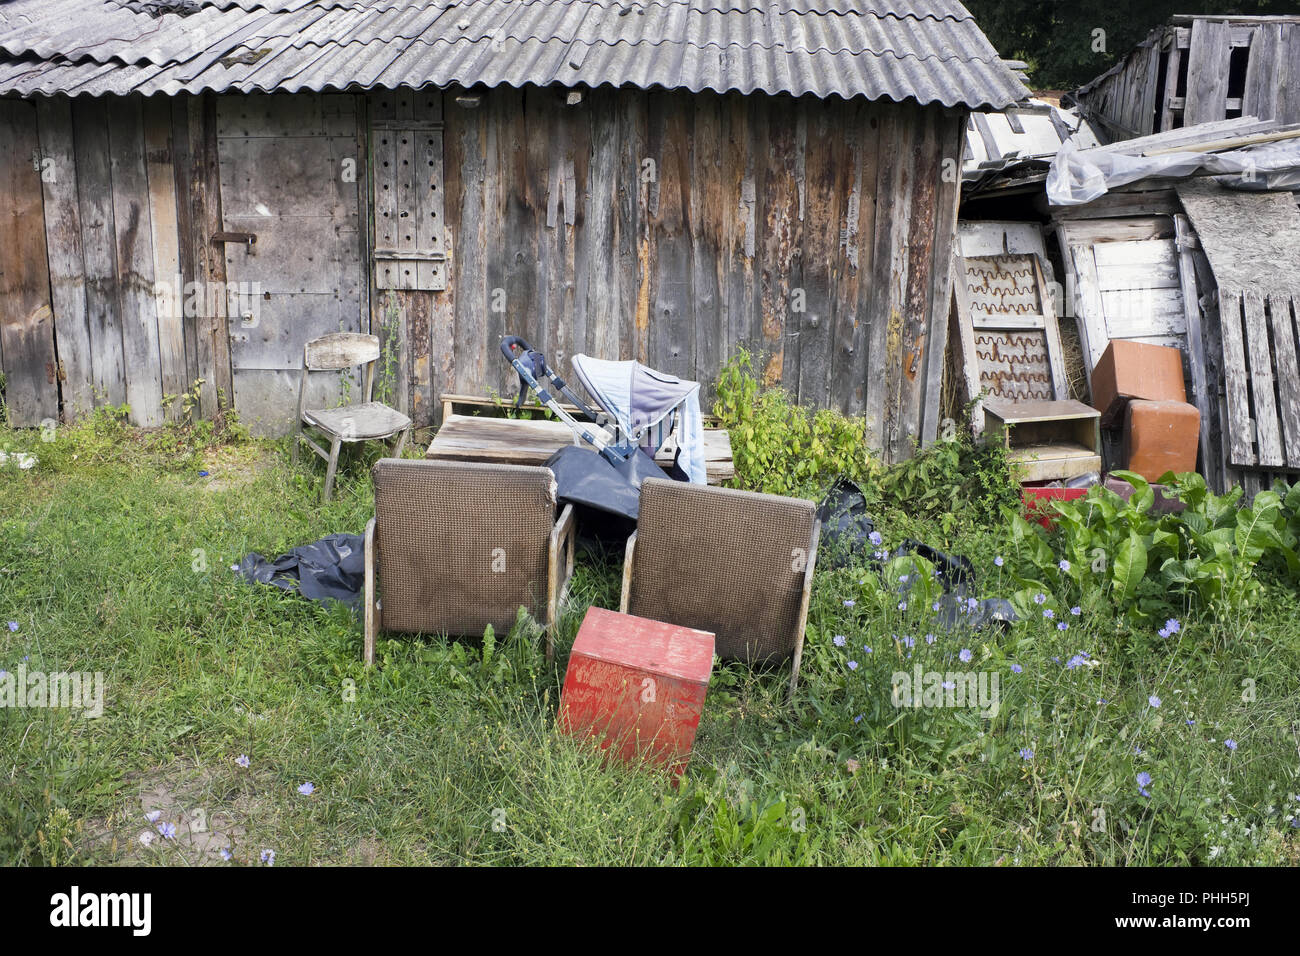 A village garbage dump near wooden destroyed sheds Stock Photo